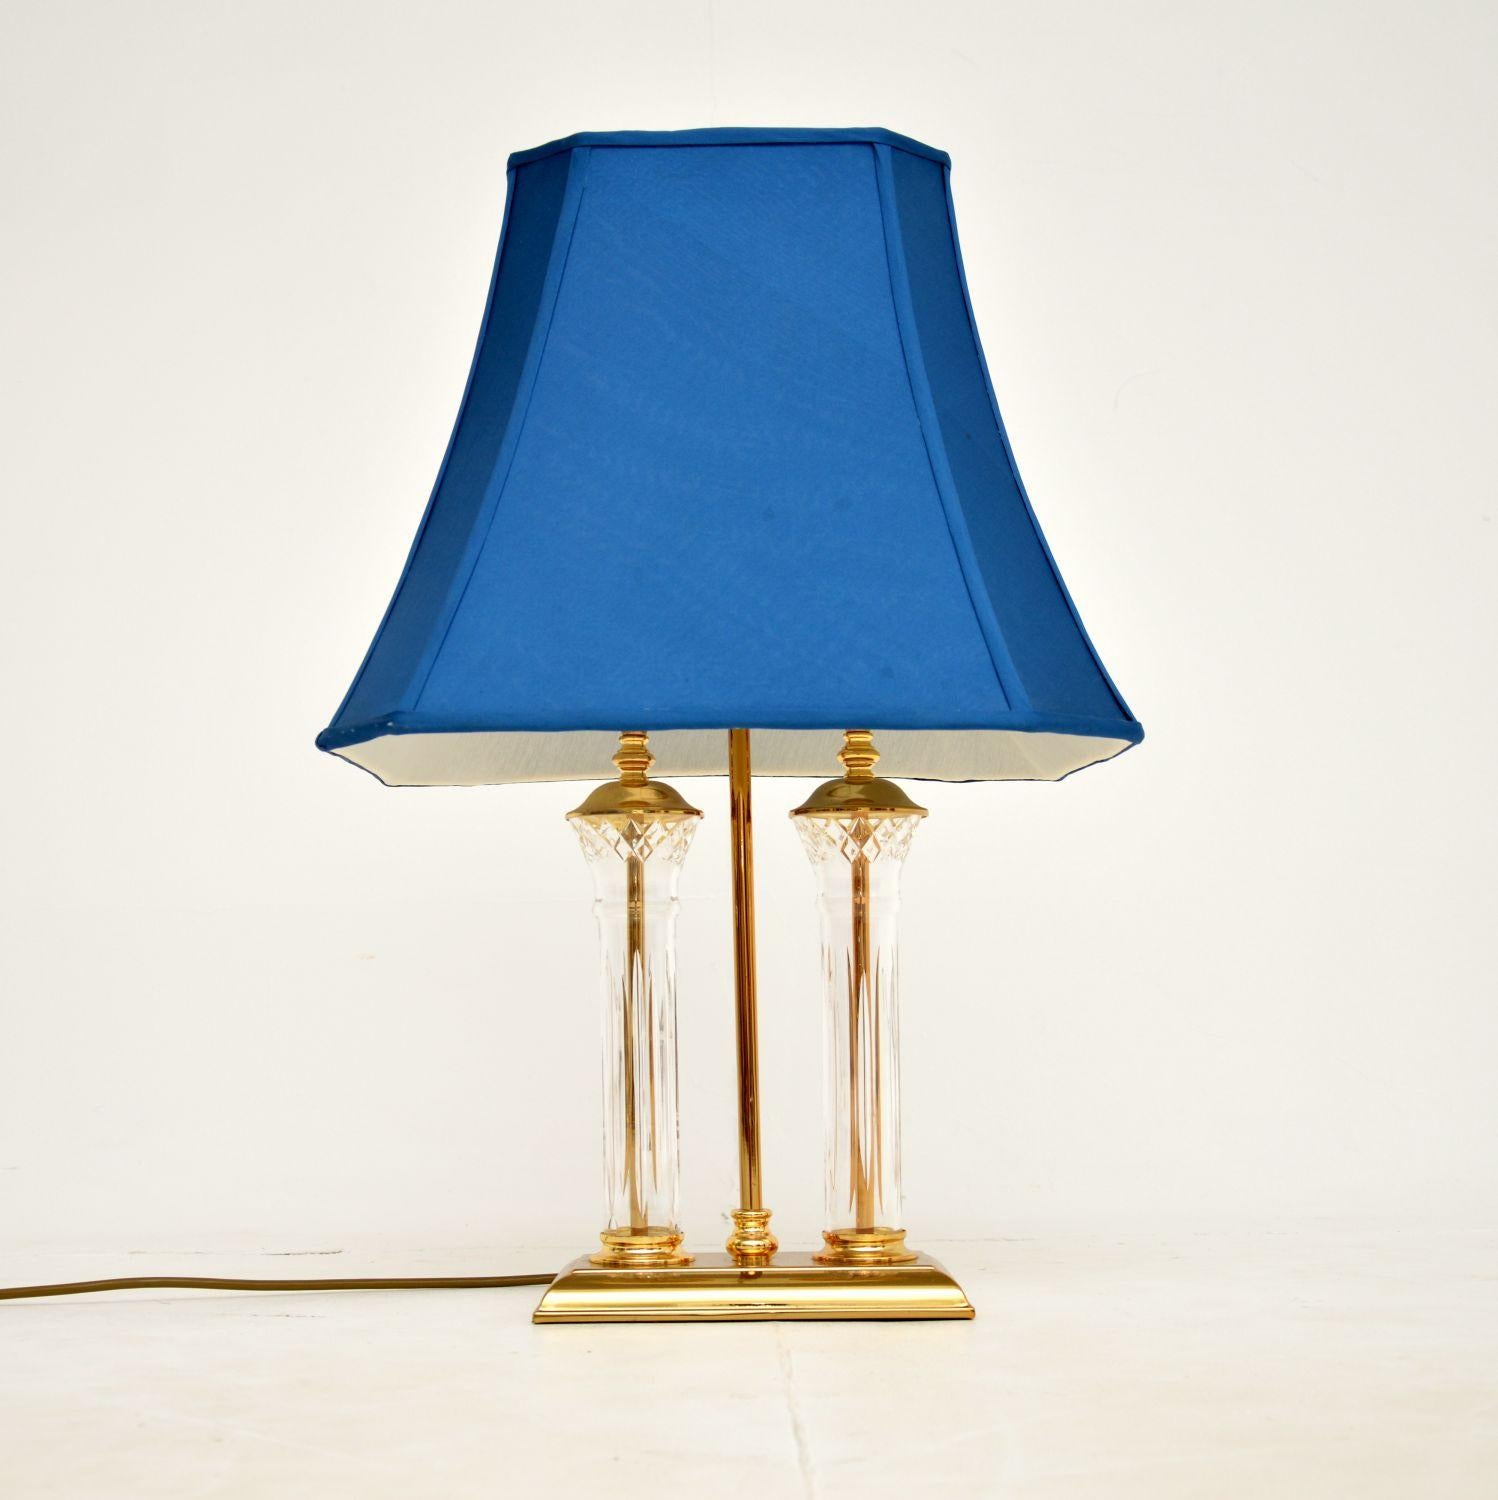 A beautiful vintage table lamp in the classic antique style. This was made in England, it dates from around the 1970’s.

It is of extremely high quality, made from cut crystal glass and solid brass. This has the original blue silk shade, which